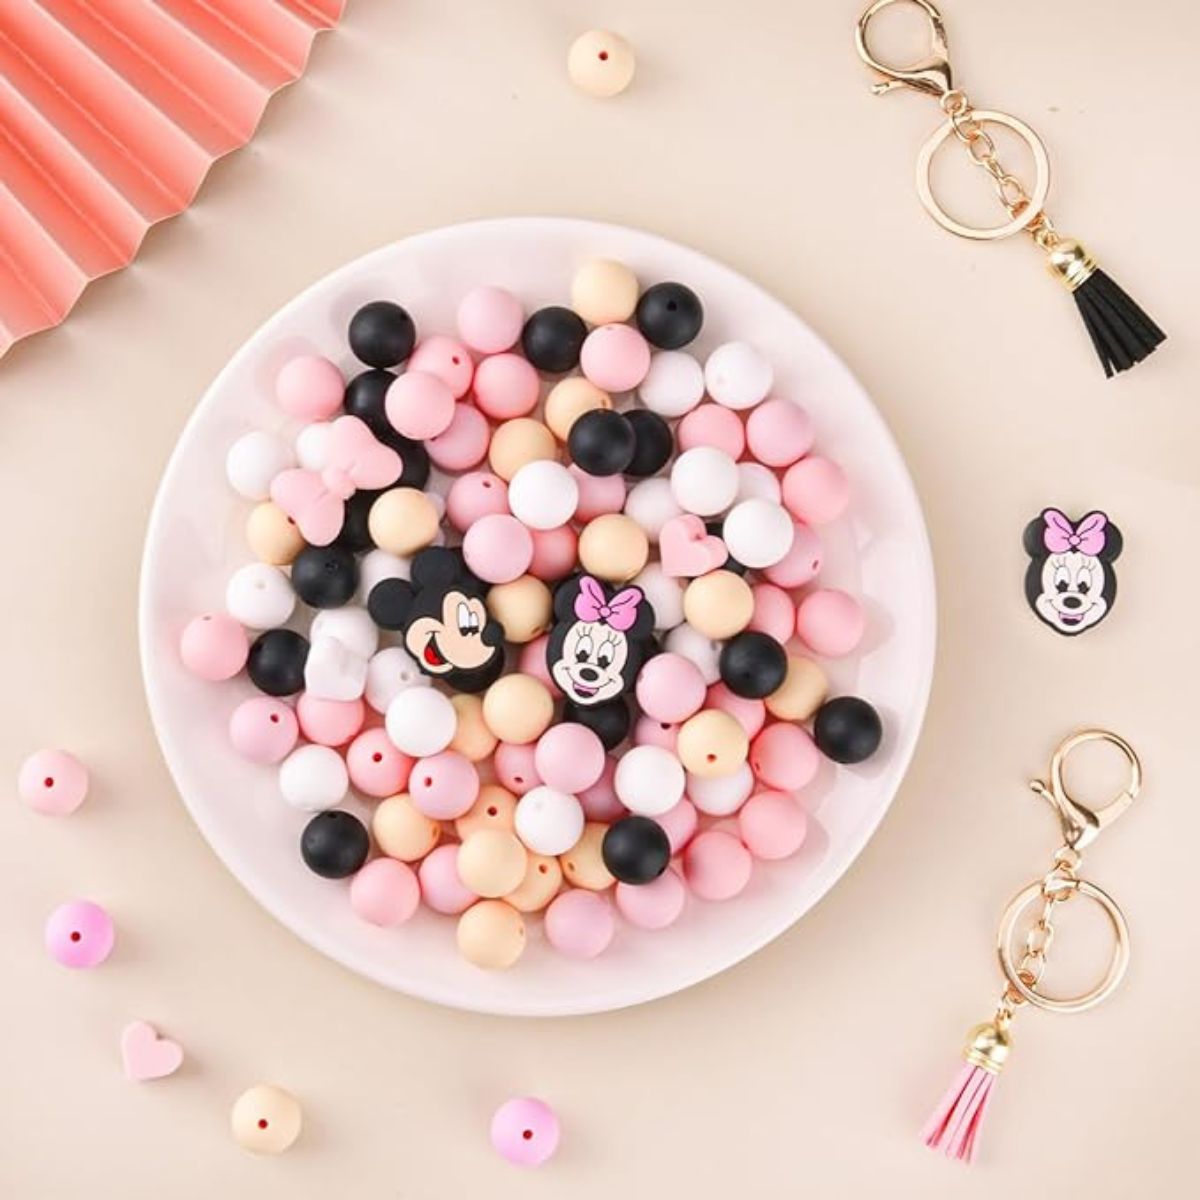 15 mm Adorable Silicone Beads Beads 109 pcs